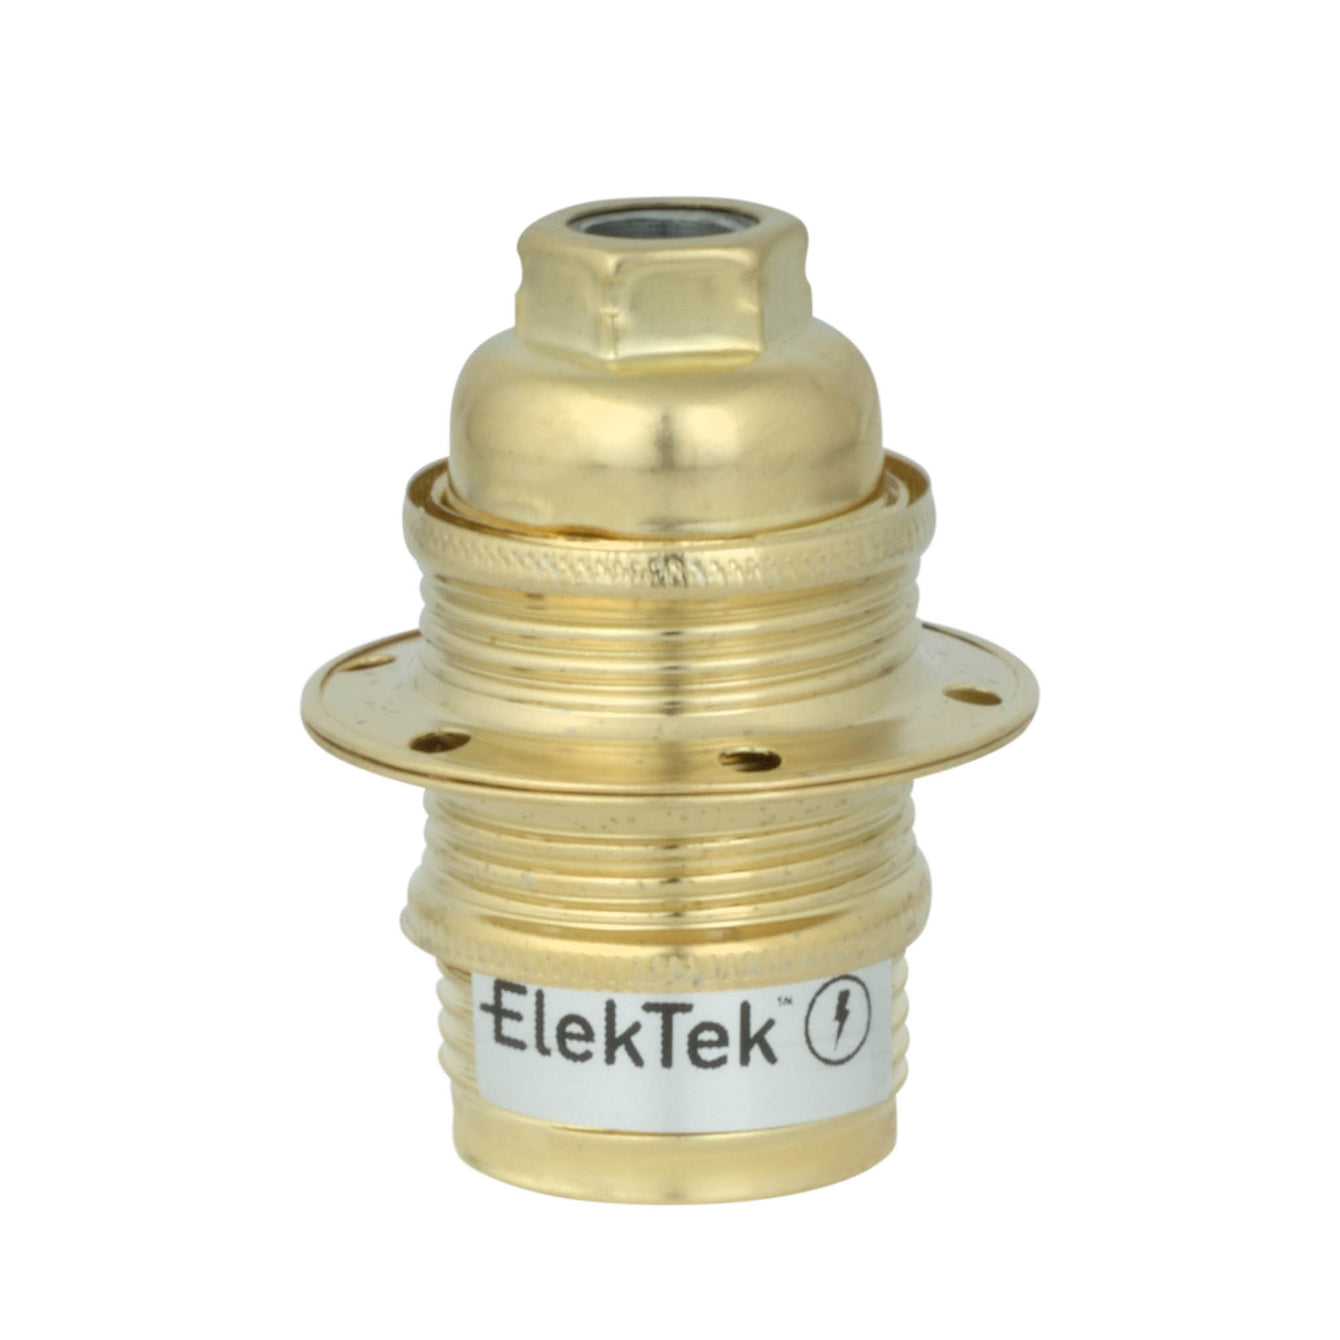 ElekTek SES E14 Lamp Holder 10mm Entry Small Edison Screw Earthed With Shade Rings Cord Grip Brass - Buy It Better Copper